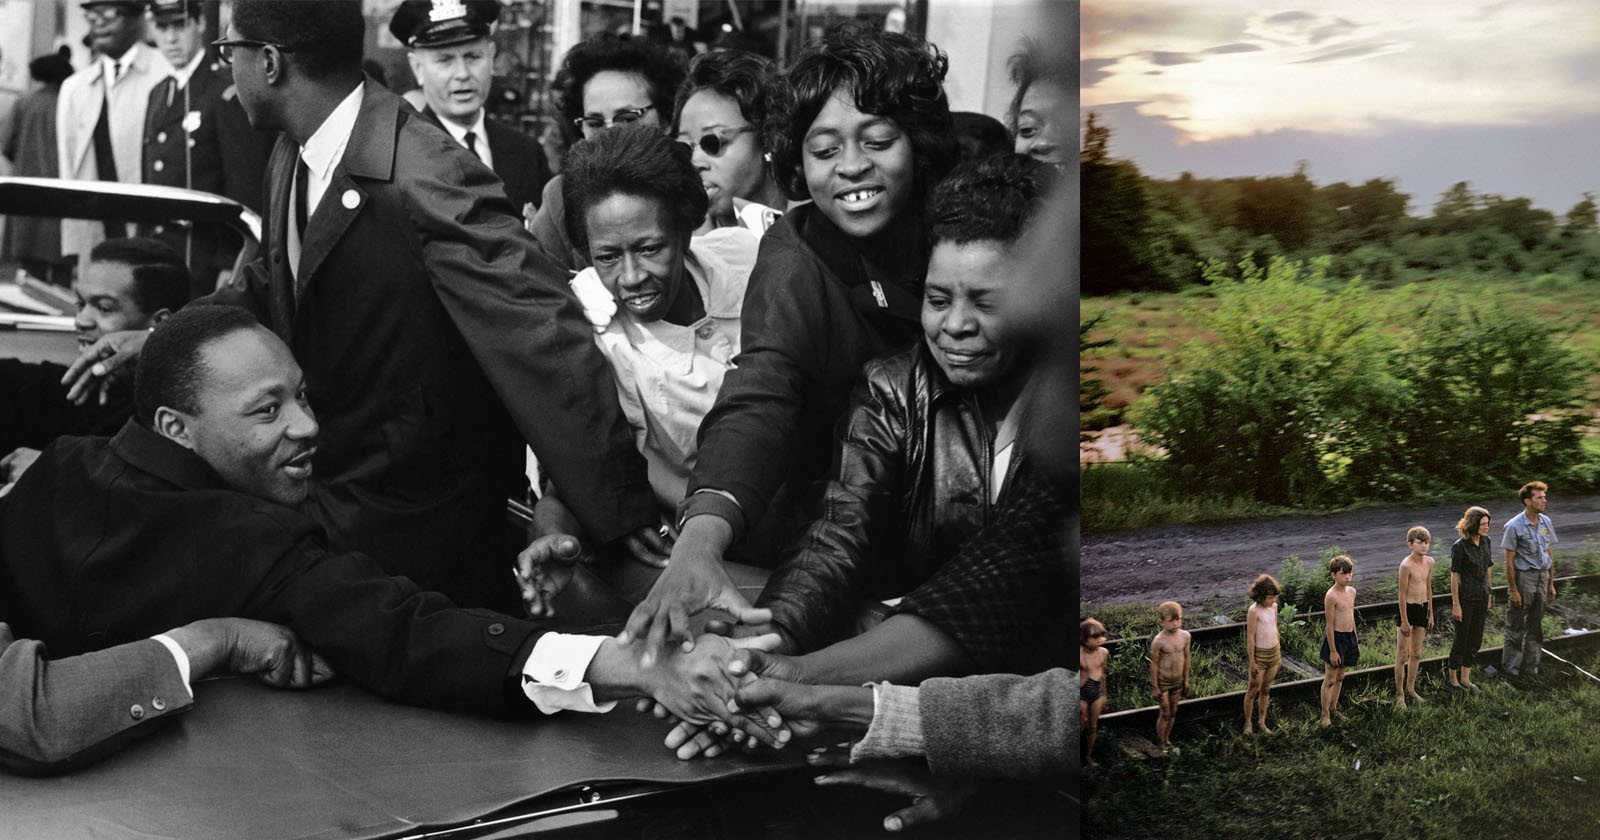 Magnum Photos Marks its 75th Anniversary With Unseen Photos